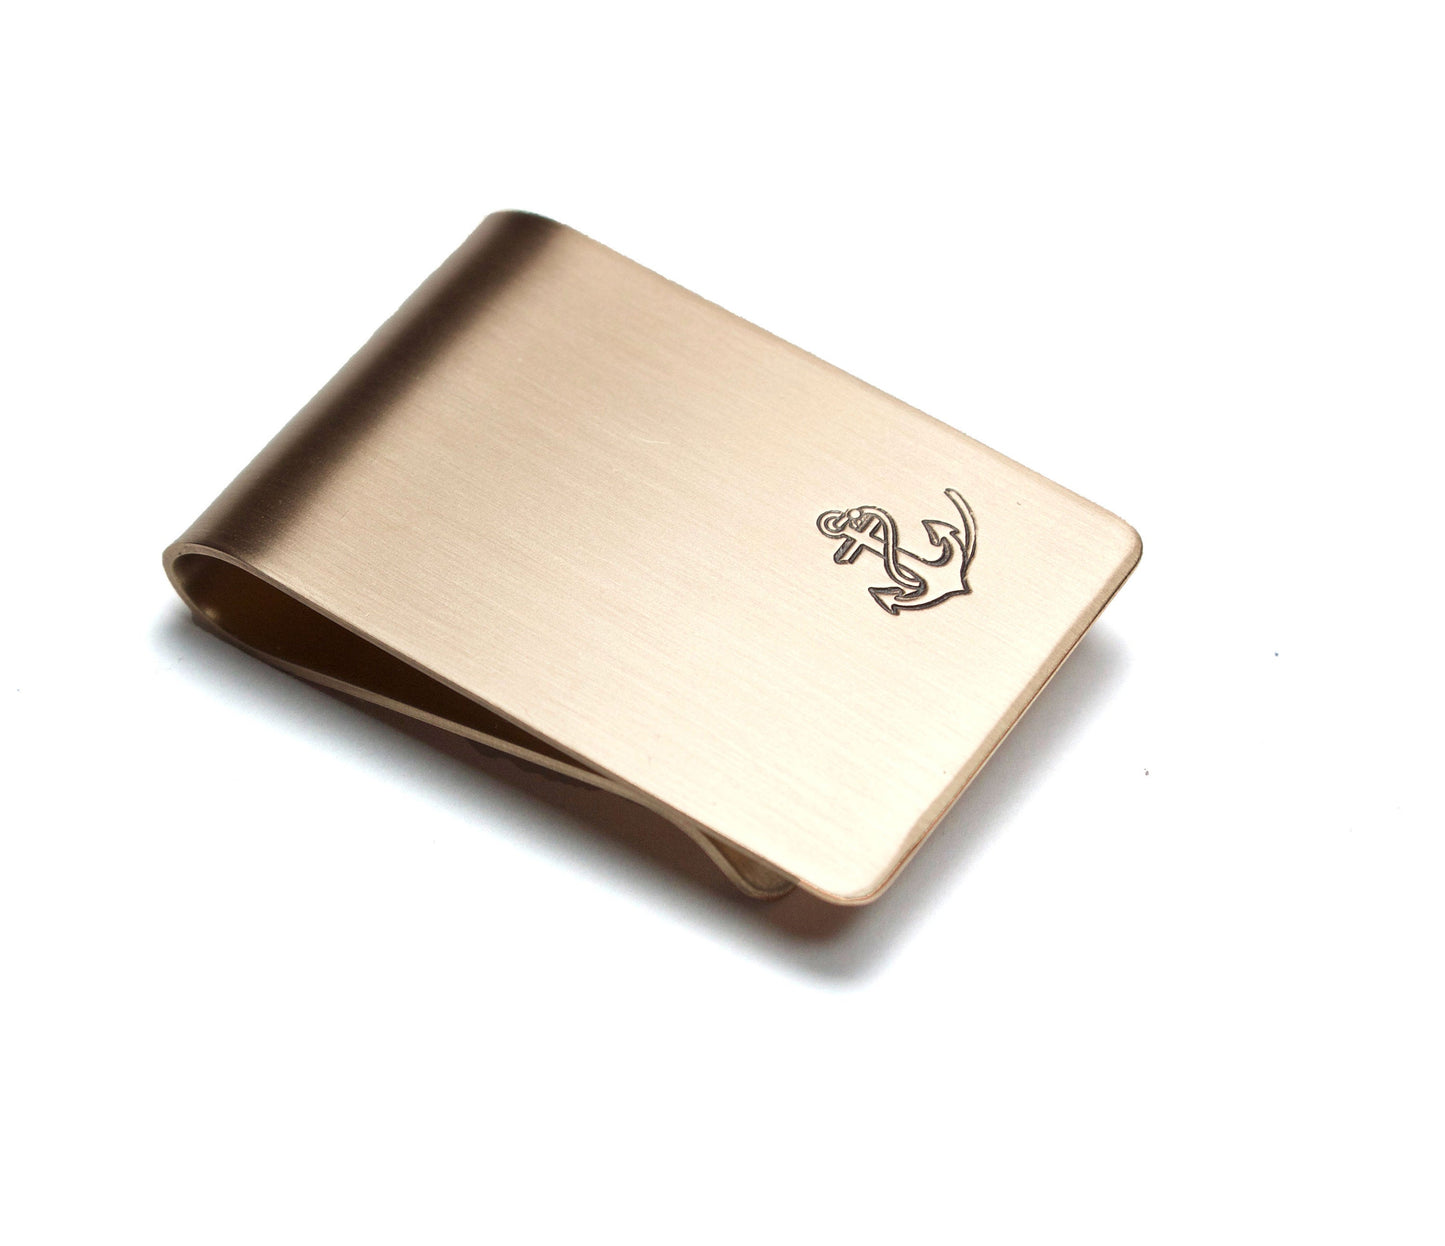 Anchor and Rope Money Clip. A small money clip with a stamped image of a boat anchor wrapped in a length of rope. The stamped design is darkened (oxidized). The money clip is shown in bronze metal.